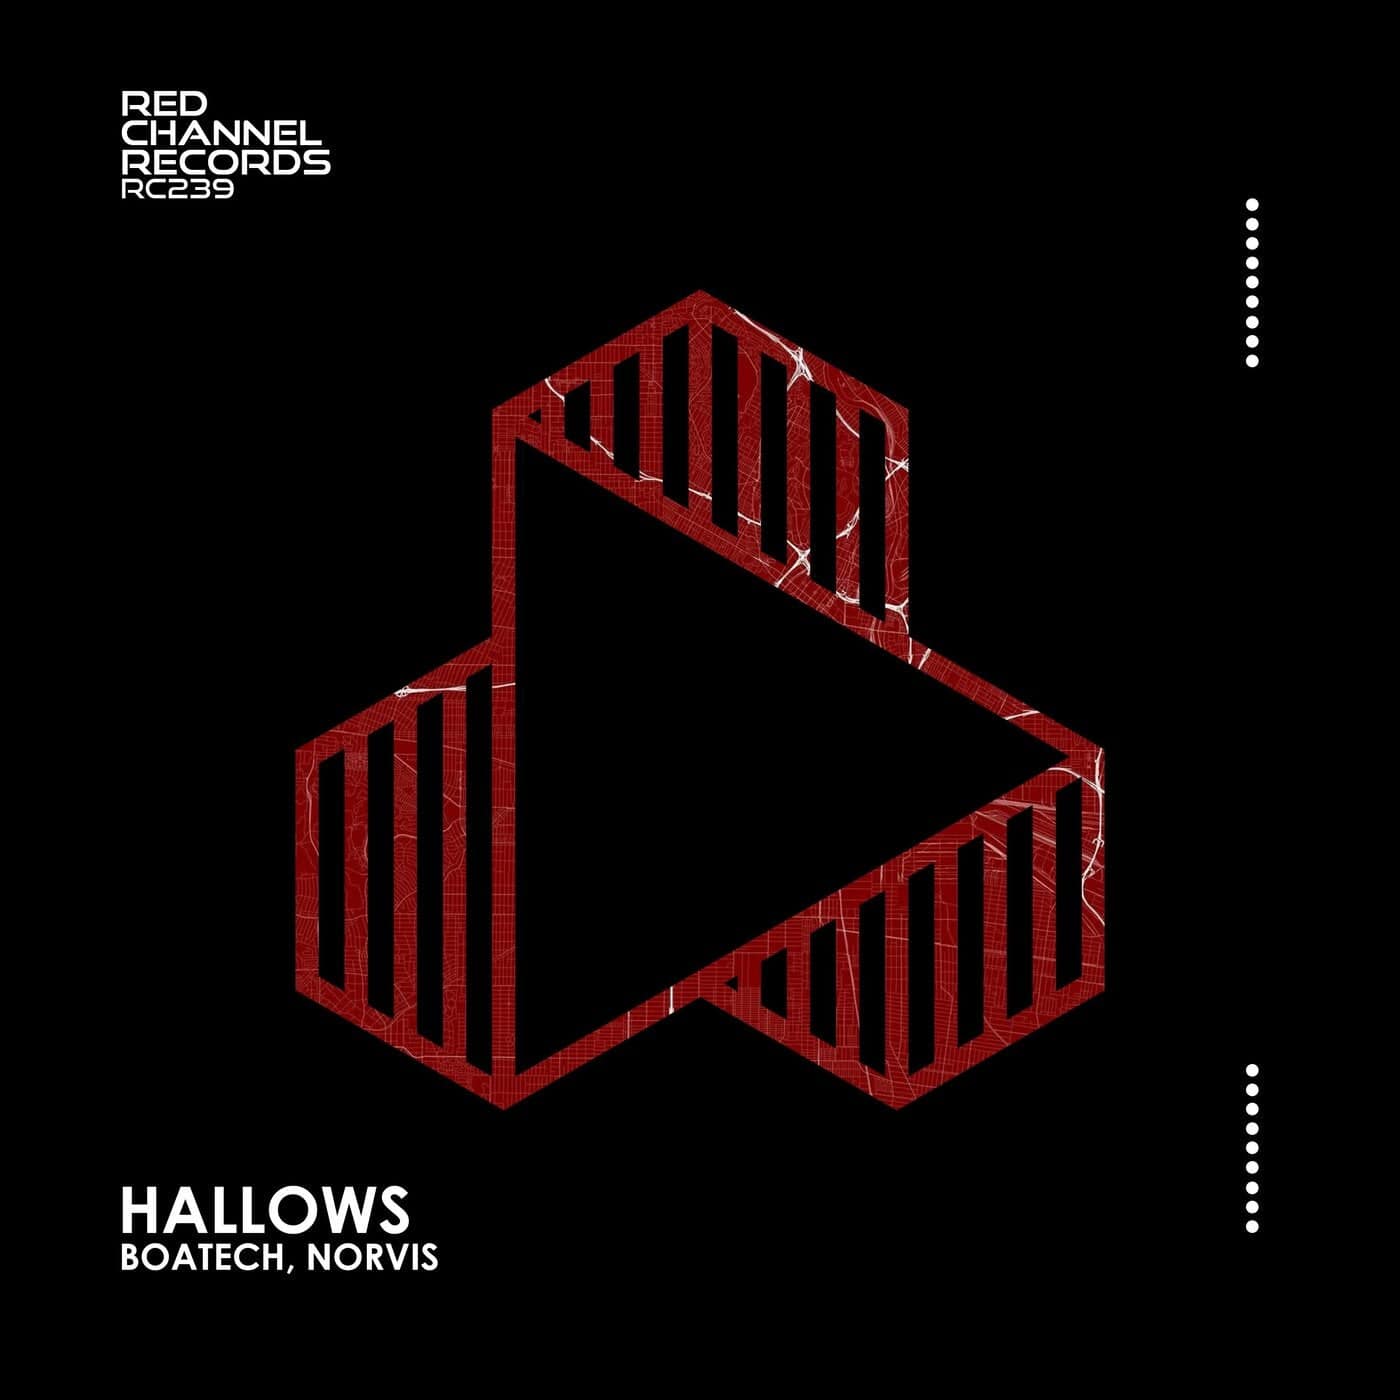 Download Boatech, Norvis - Hallows on Electrobuzz